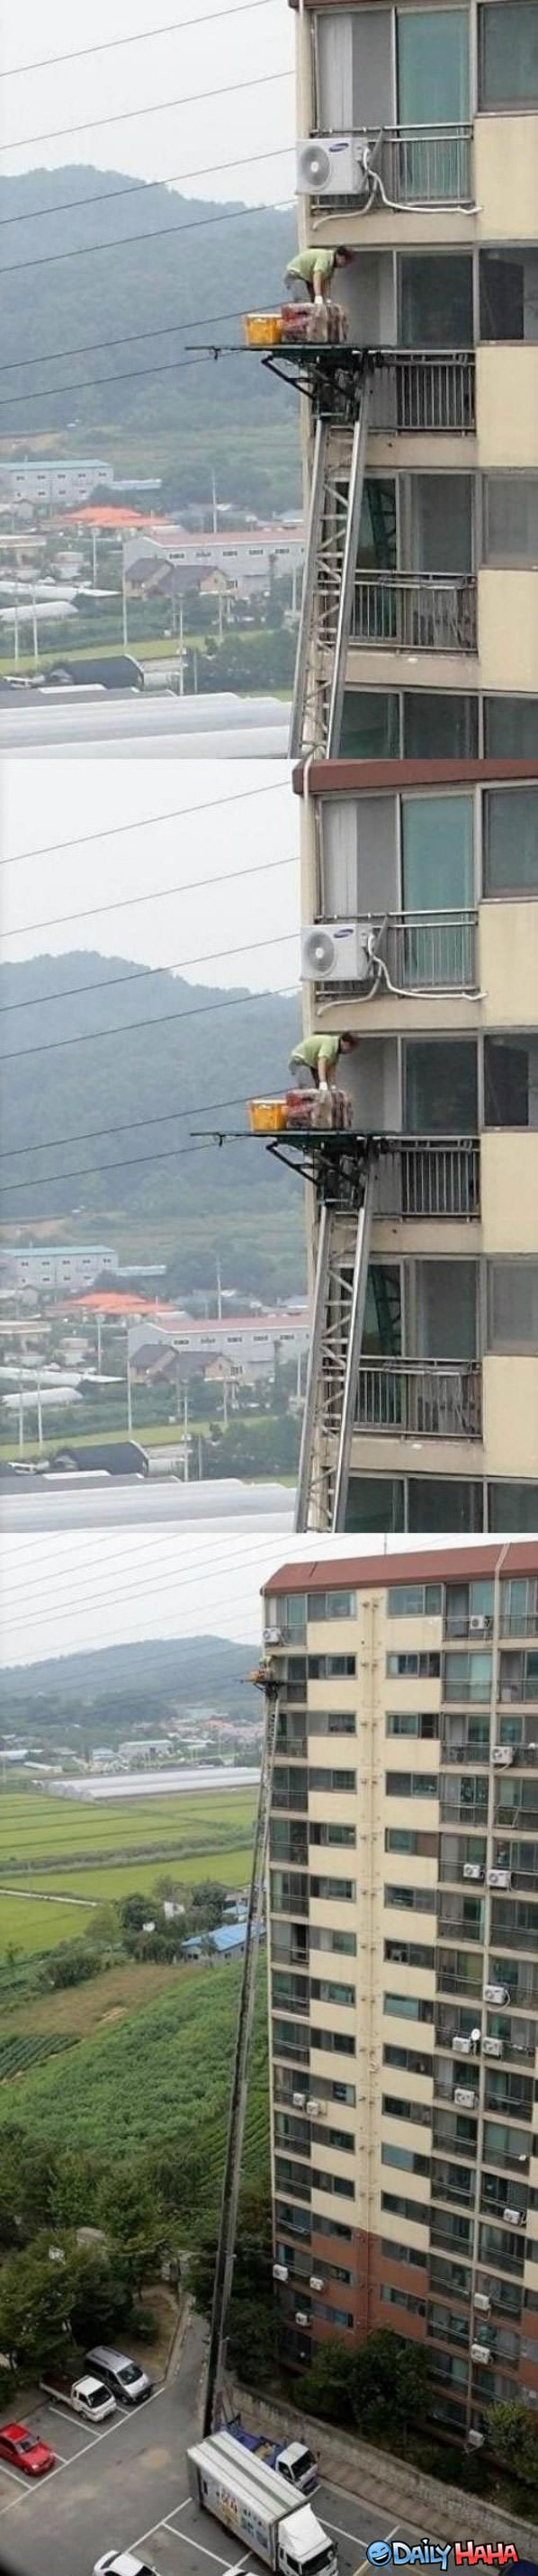 Looks Safe funny picture